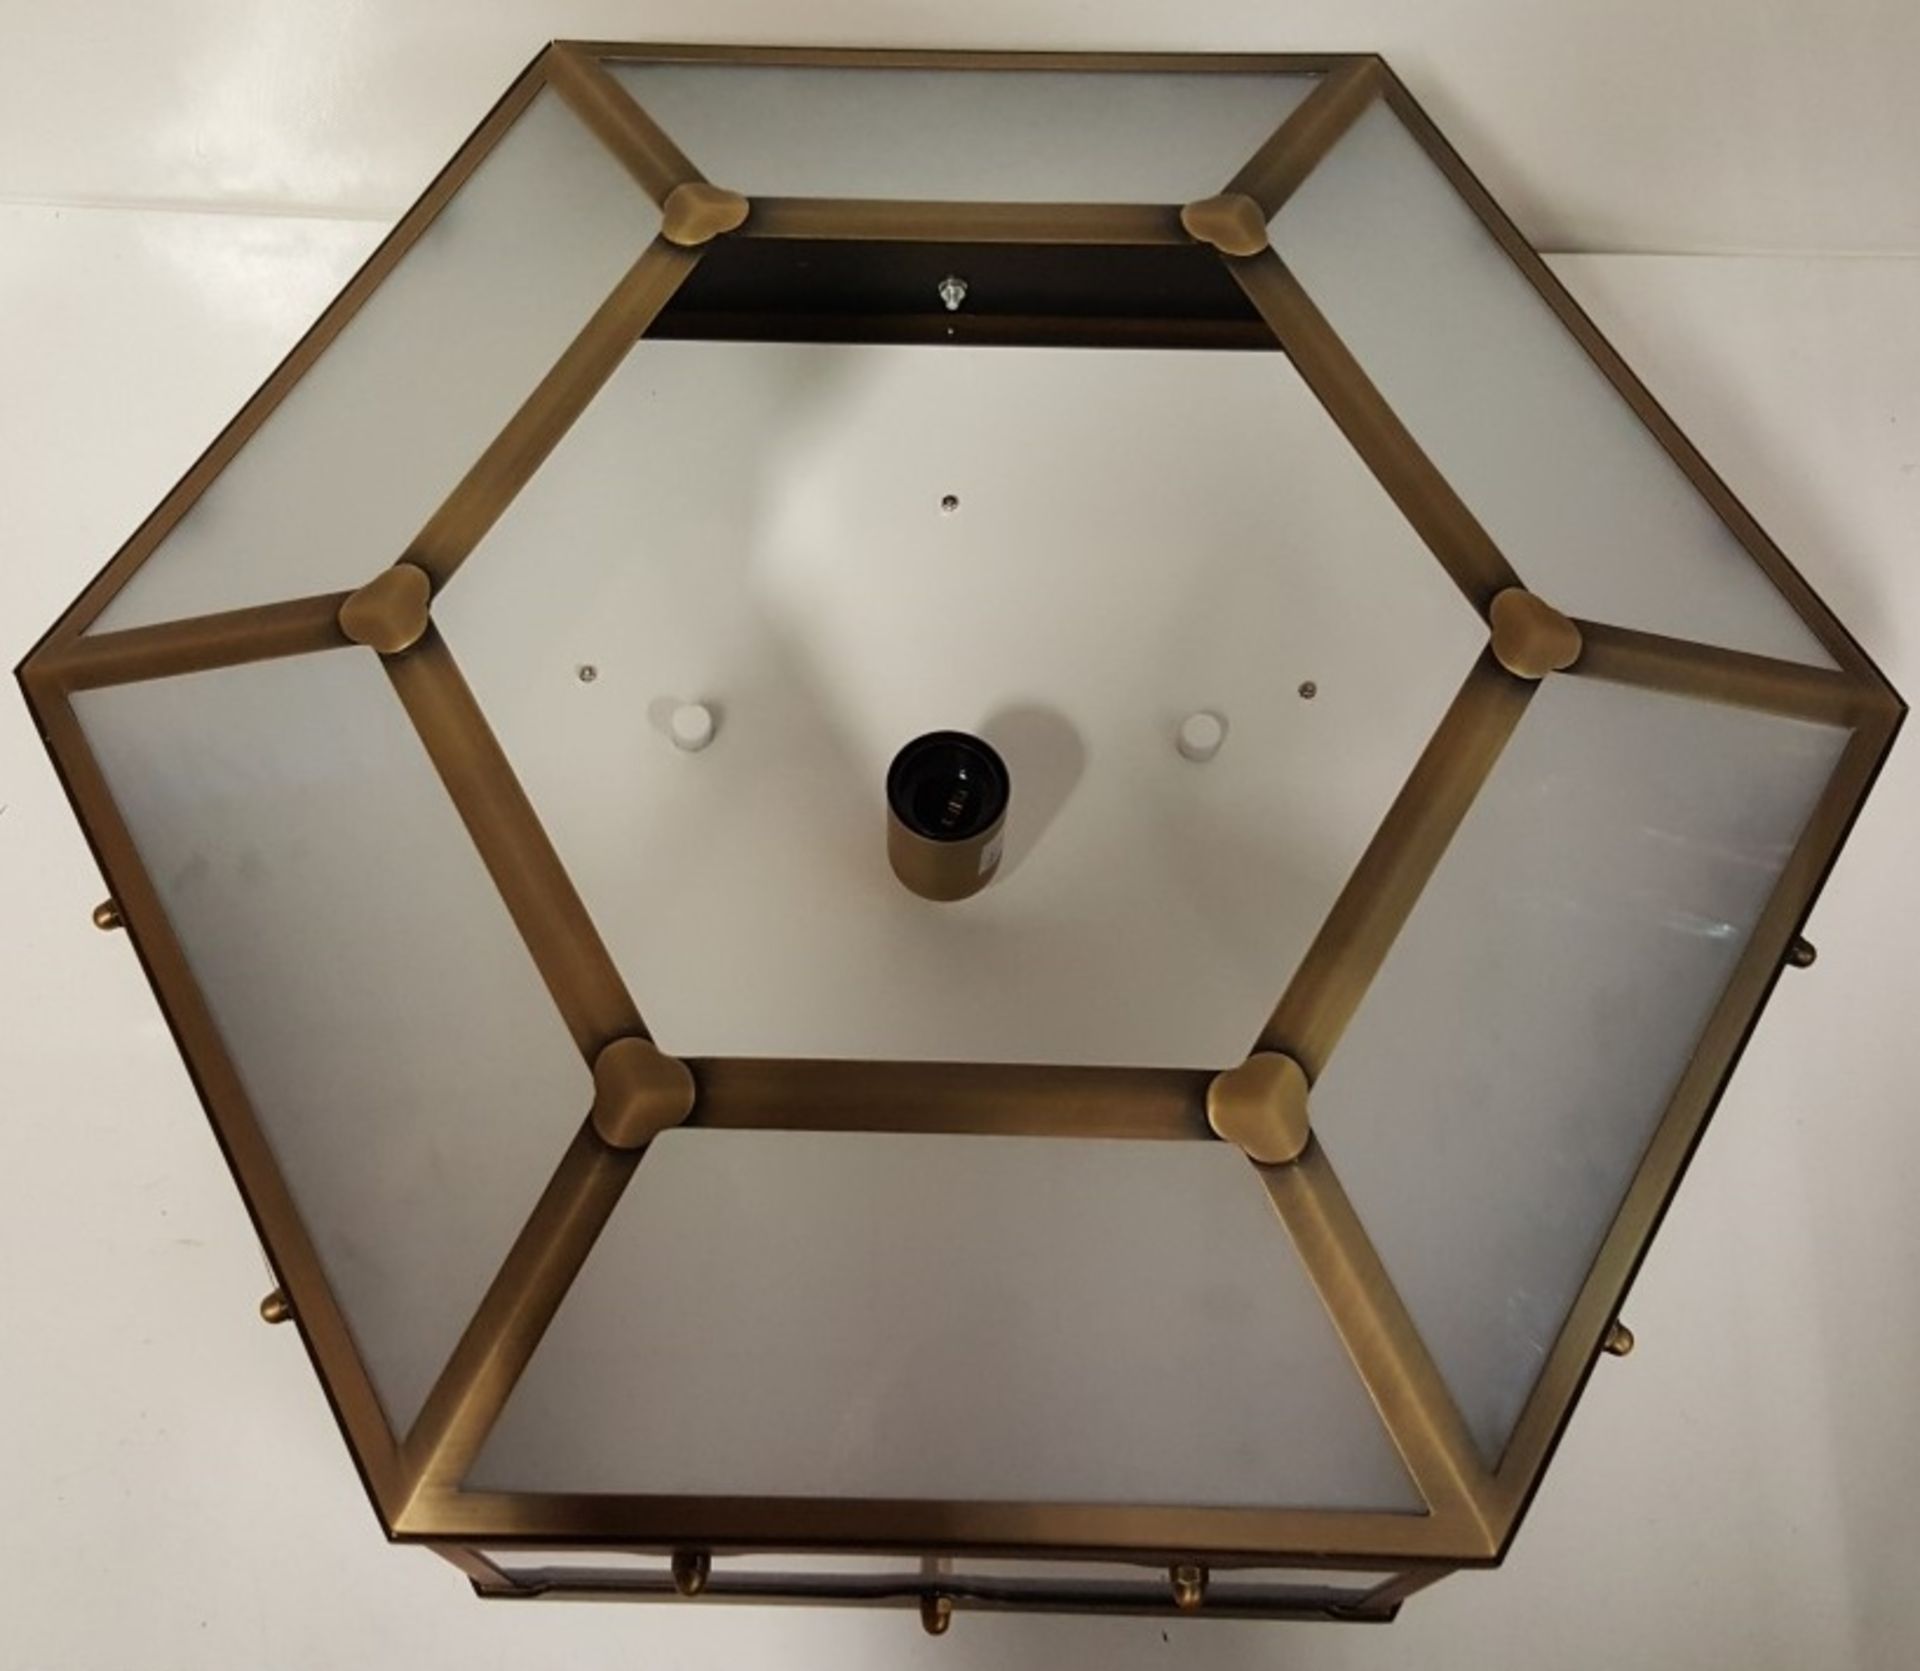 1 x Chelsom Flush Fitting Hexagonal Shaped Light Fitting In A Antique Brass Finish - REF:J2373 - Image 4 of 7